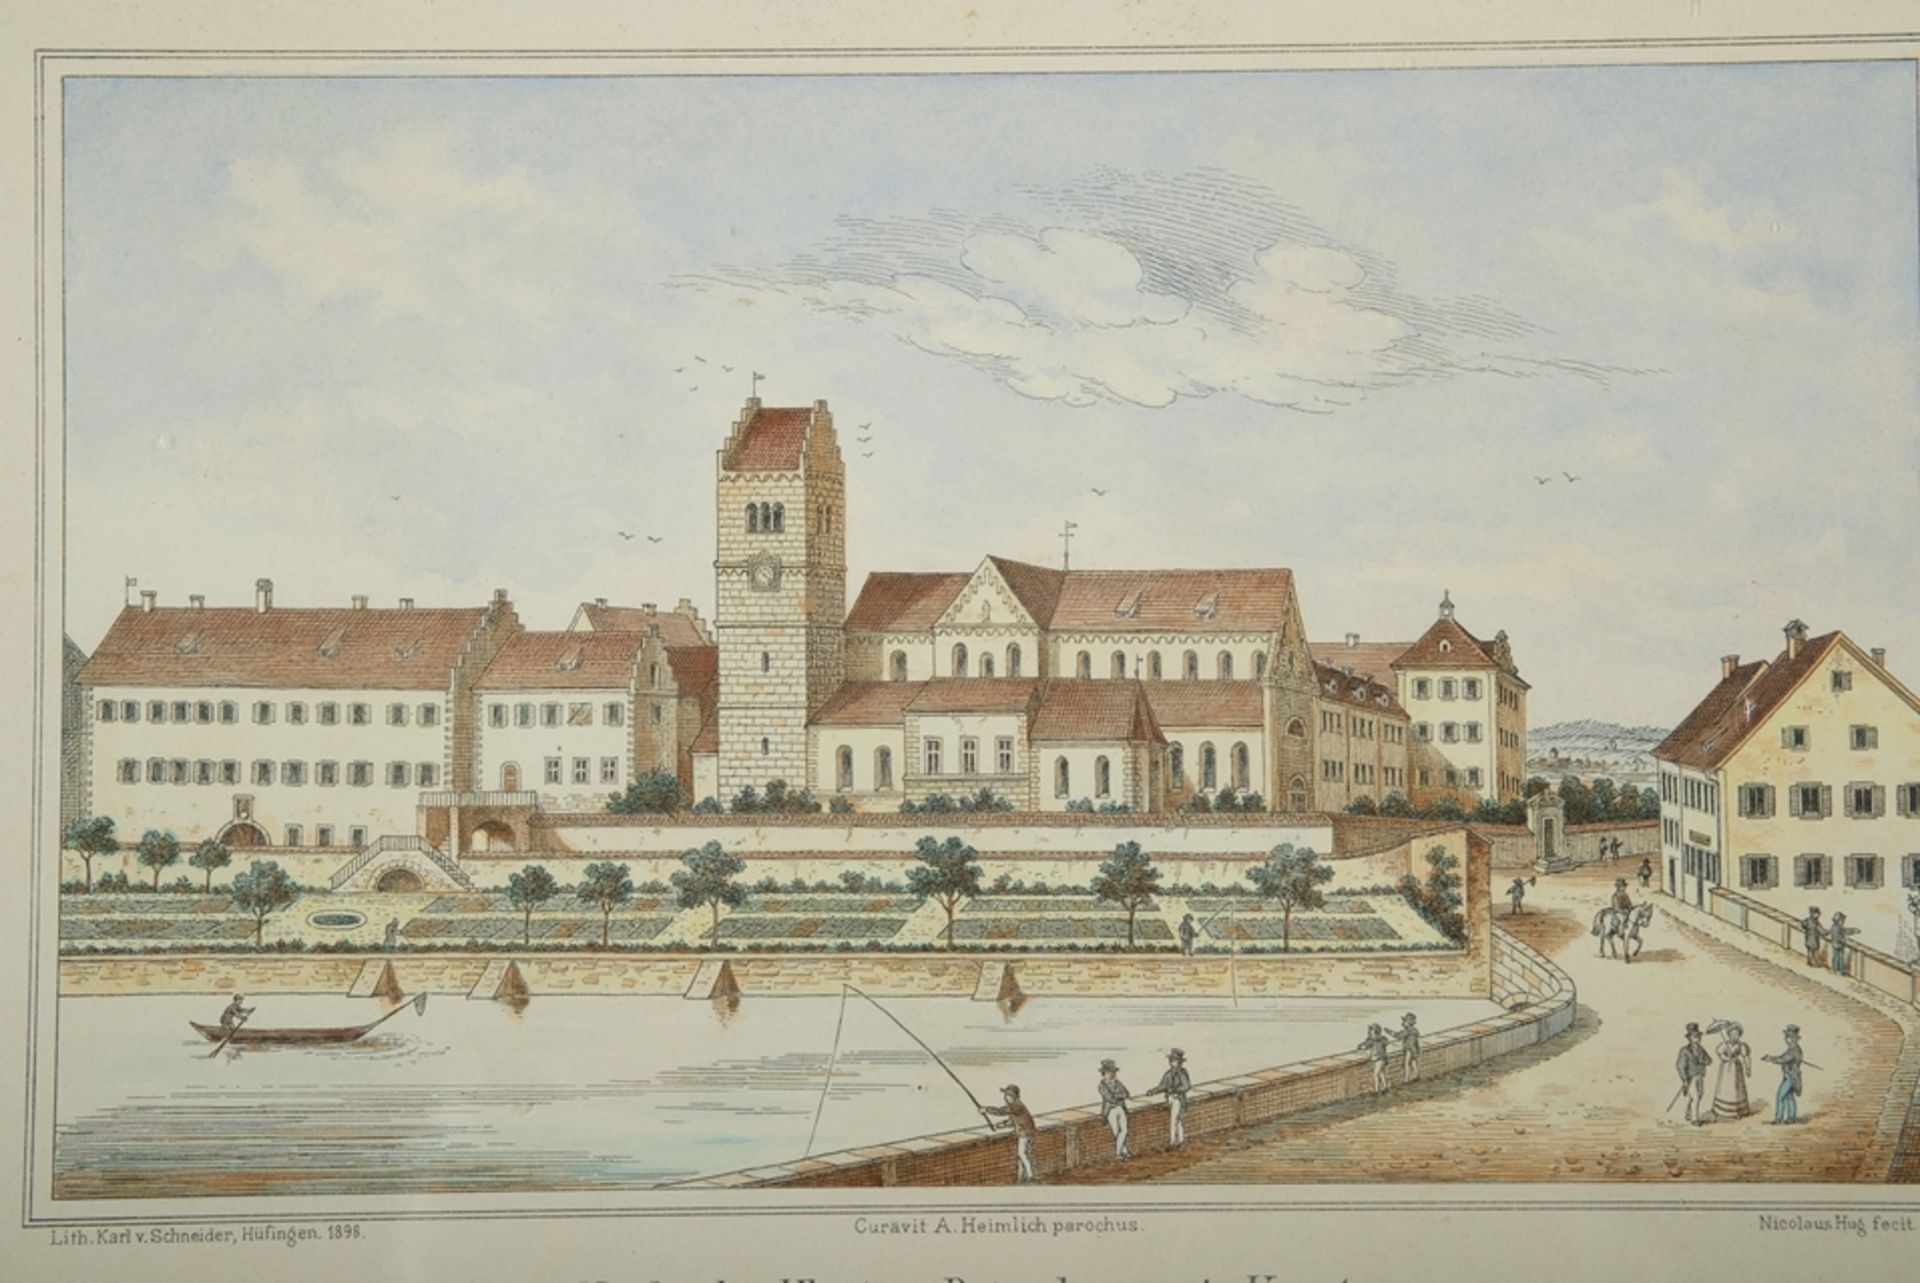 "Kirche des Klostershausen in Konstanz", 1898, lithograph. Inscribed at the bottom: "Lith. Karl v. 